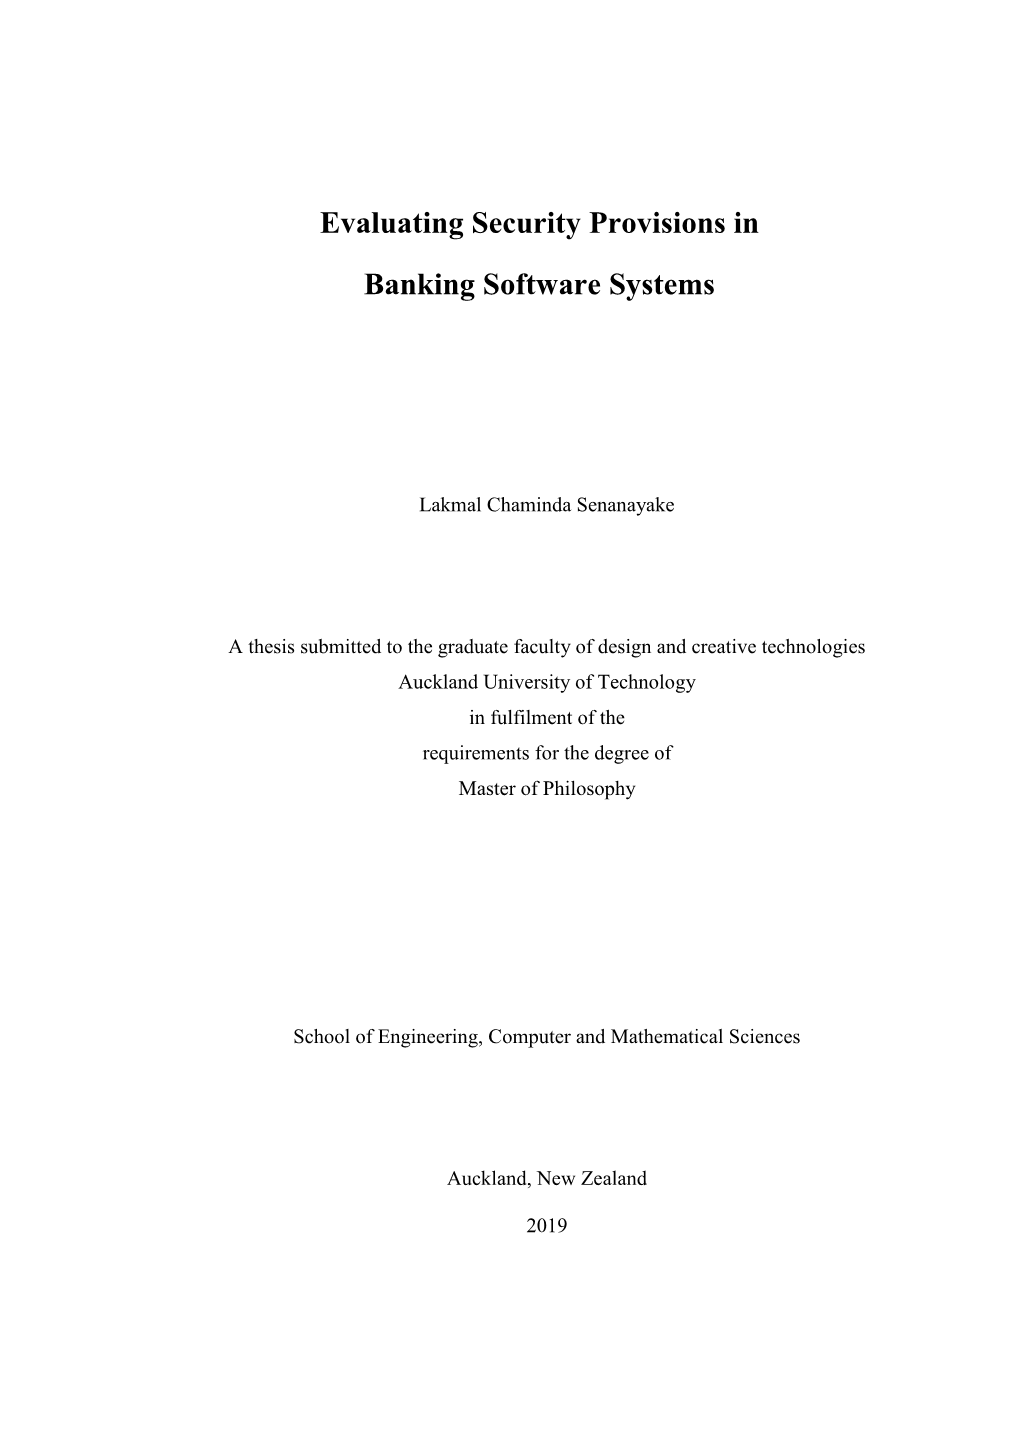 Evaluating Security Provisions in Banking Software Systems